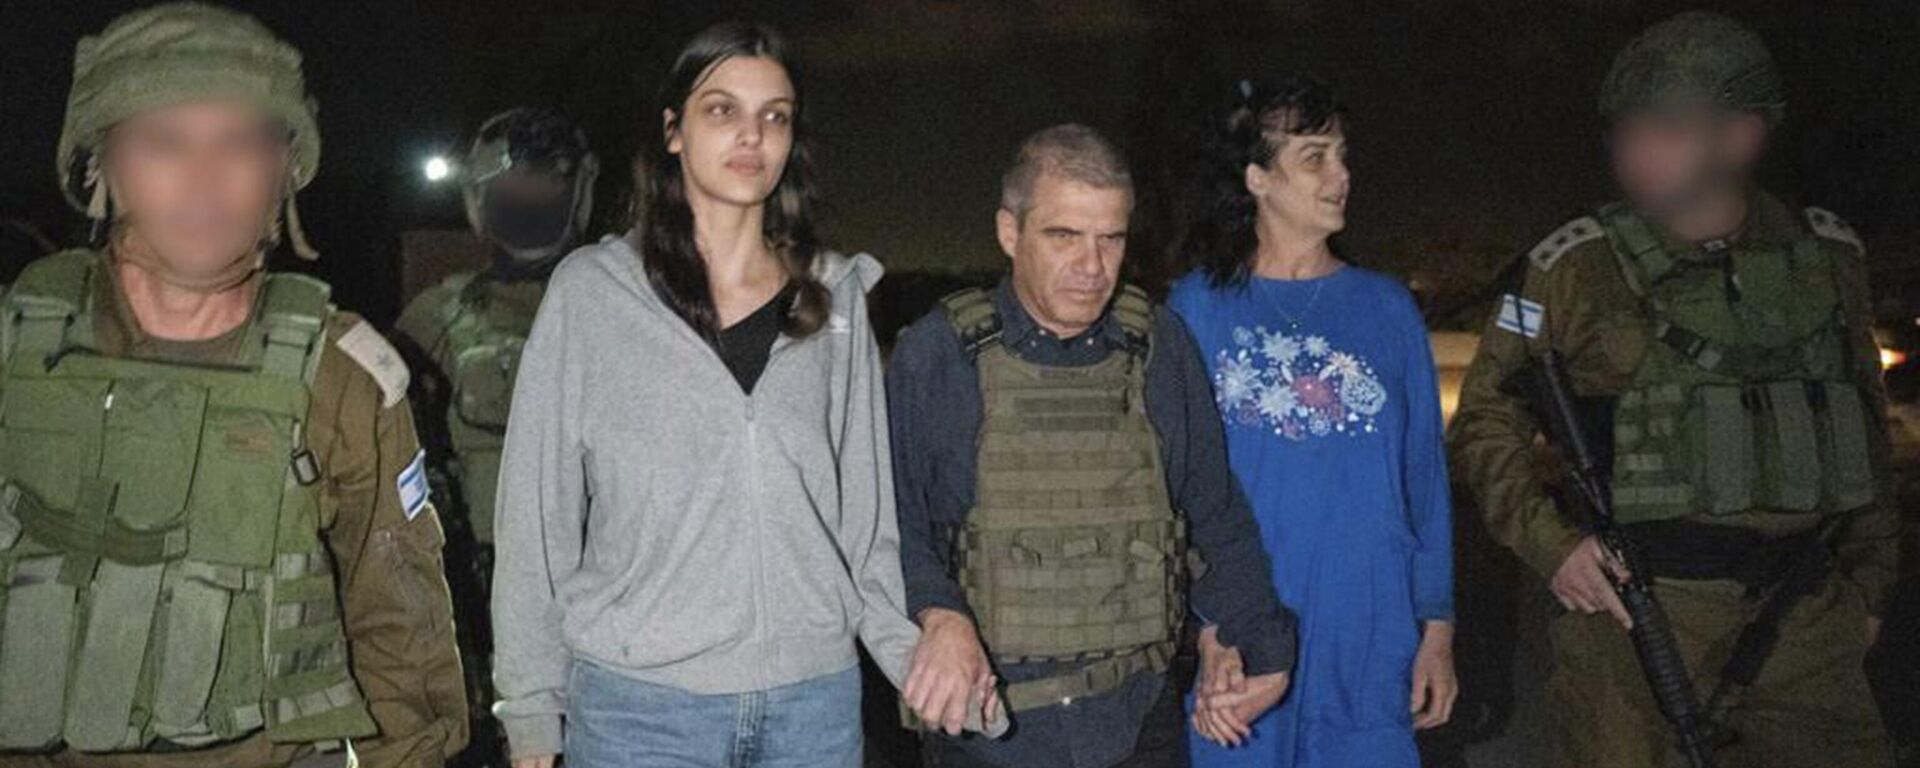 In this photo provided by the Government of Israel, Judith Raanan, right, and her 17-year-old daughter Natalie are escorted by Israeli soldiers and Gal Hirsch, Prime Minister Benjamin Netanyahu's special coordinator for returning the hostages, as they return to Israel from captivity in the Gaza Strip, Friday, Oct. 20, 2023. Hamas released the pair in what it said was a goodwill gesture late Friday, nearly two weeks after they were captured in a bloody cross-border raid by the Islamic militant group. The Hamas attack sparked a war that is entering its third week, and Hamas is believed to still be holding some 200 people hostage. - Sputnik International, 1920, 05.03.2024